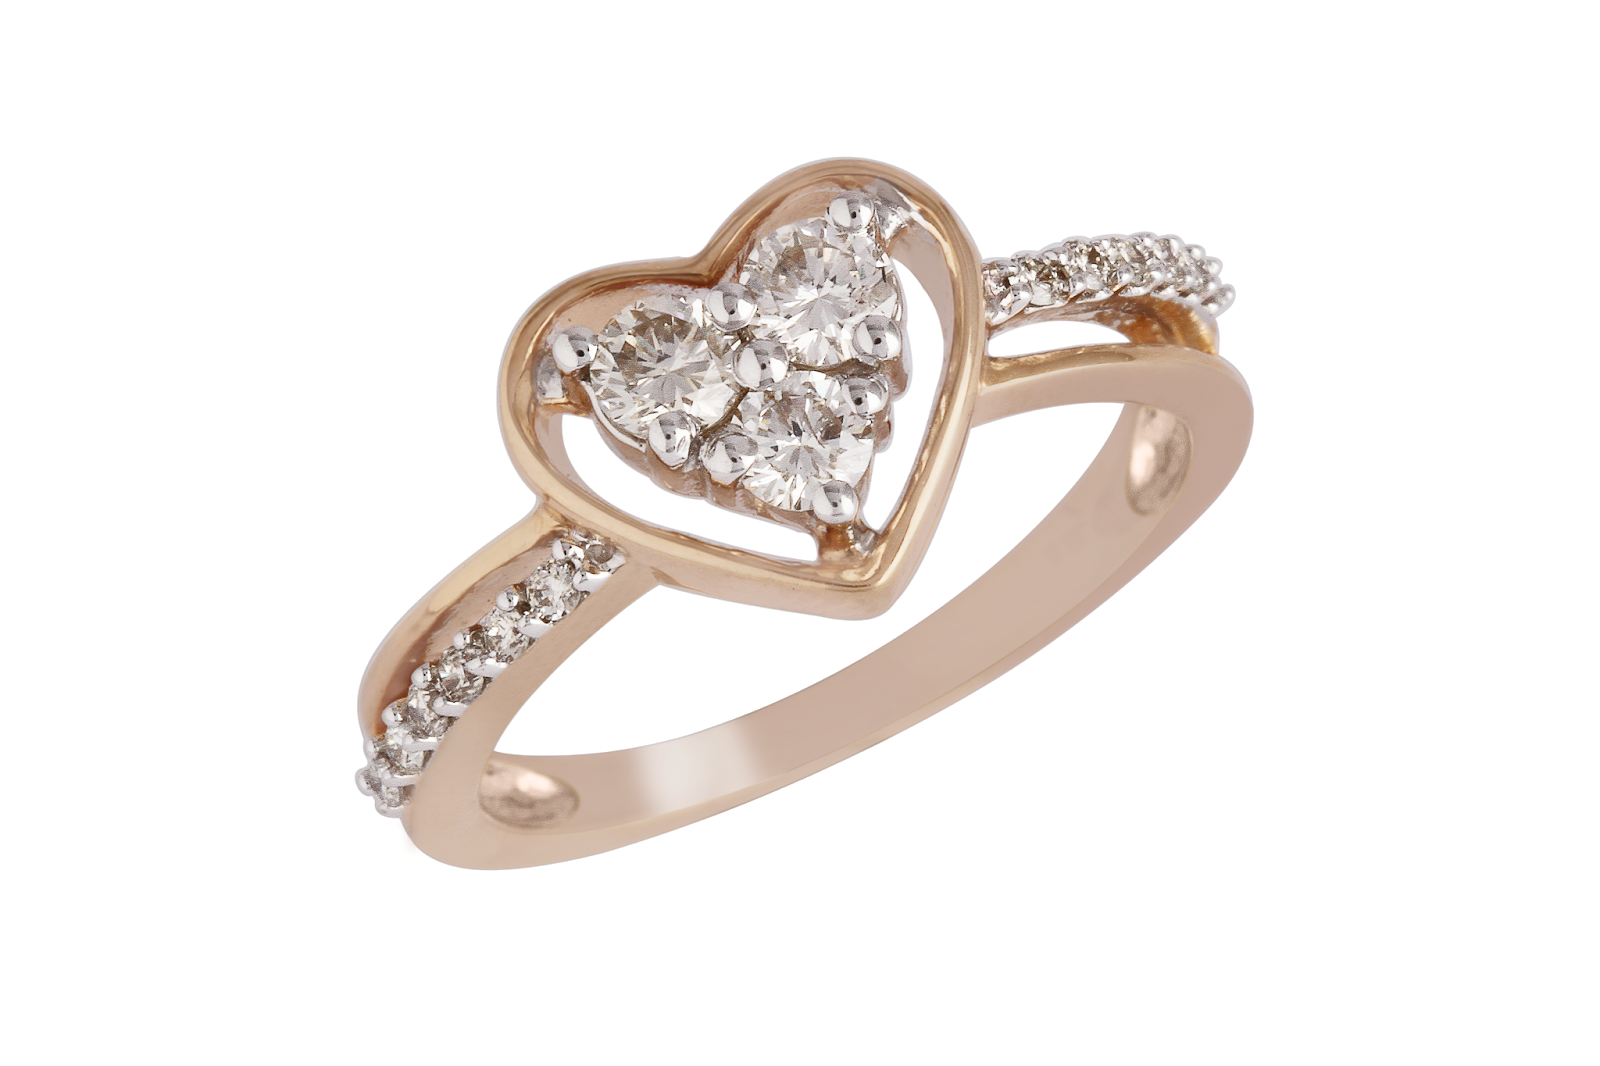 Buy American Diamond Traditional Ring - Pick Any 1 (ADTR1) Online at Best  Price in India on Naaptol.com